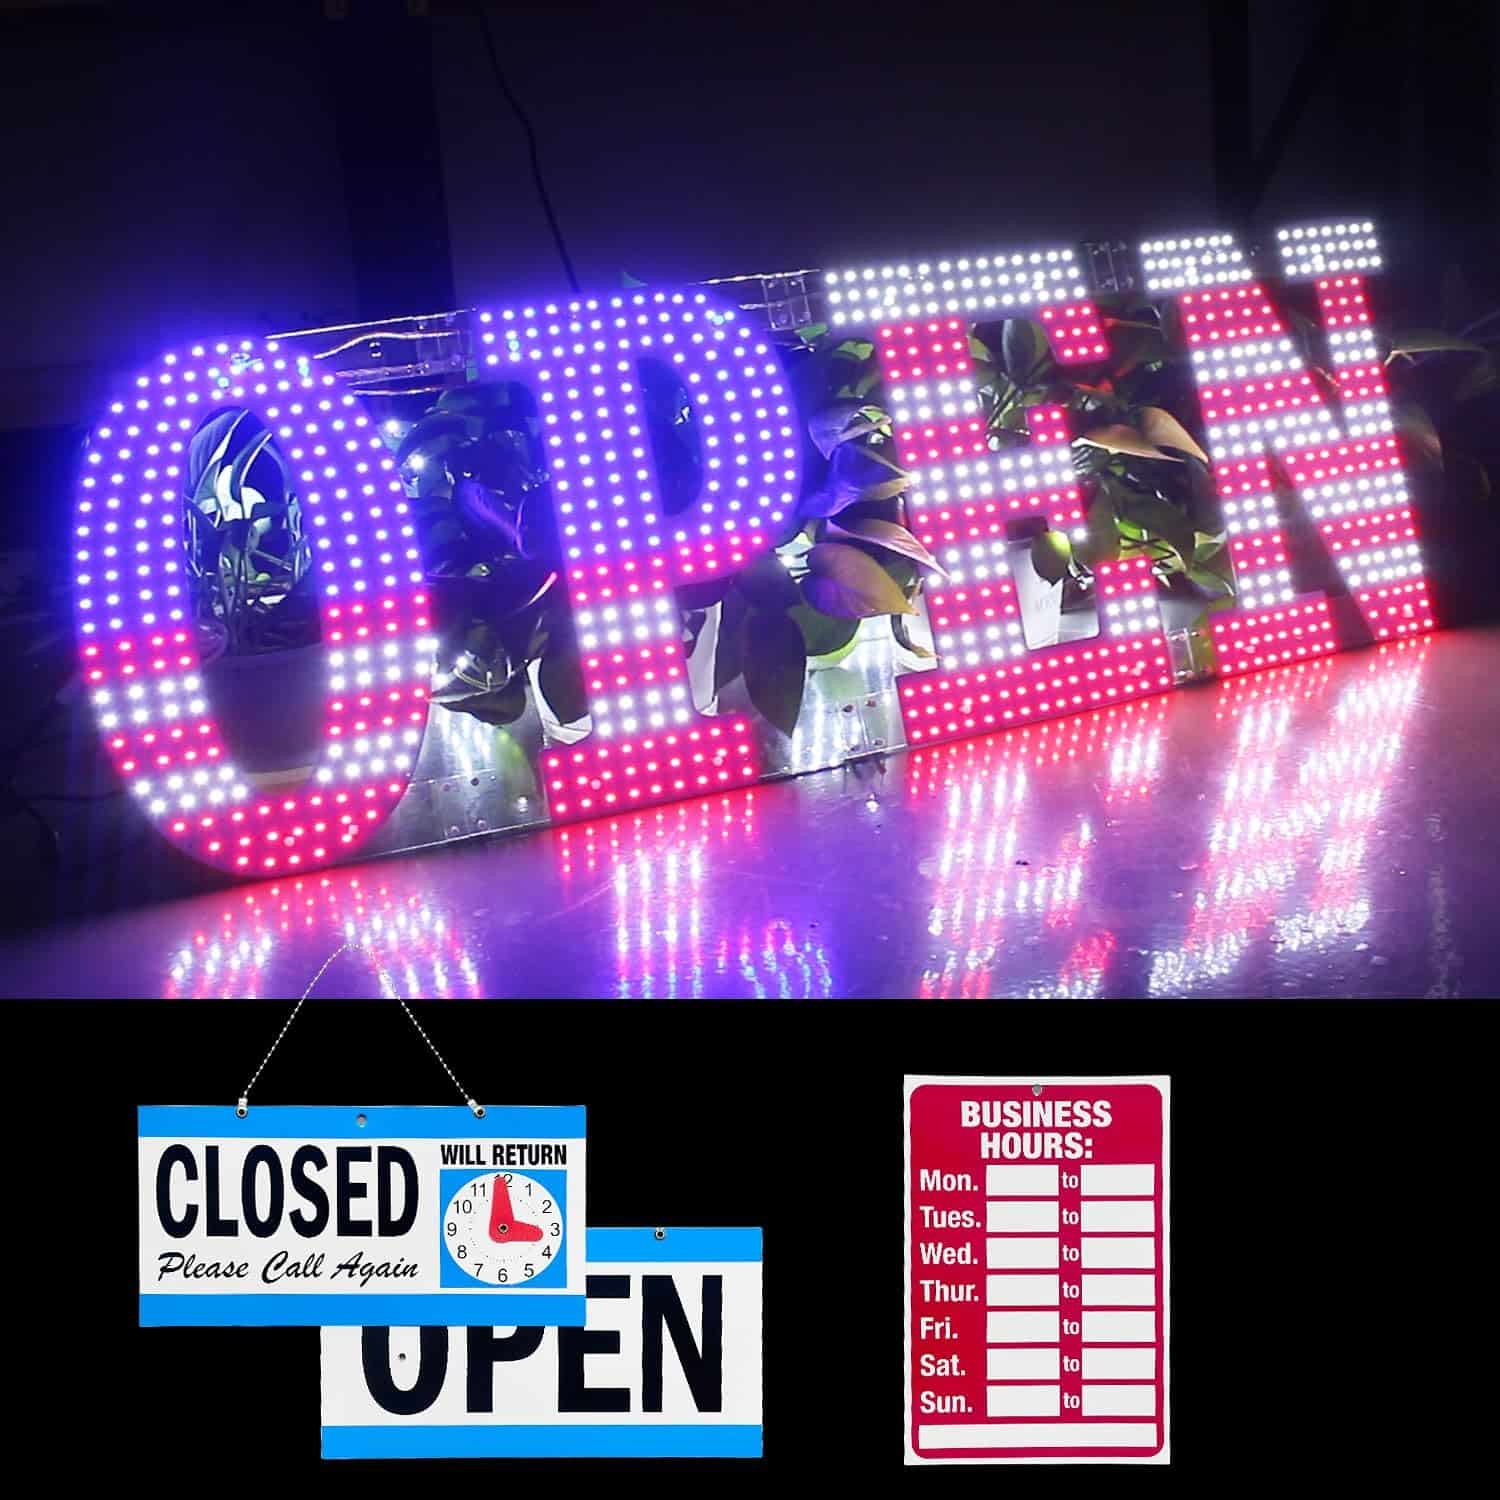 LemonNova LED Open Signs for Business 30x10 inch Ultra Bright US Flag Open Sign LED for Window Wall Door Cafe Retail Store Barber Resturant